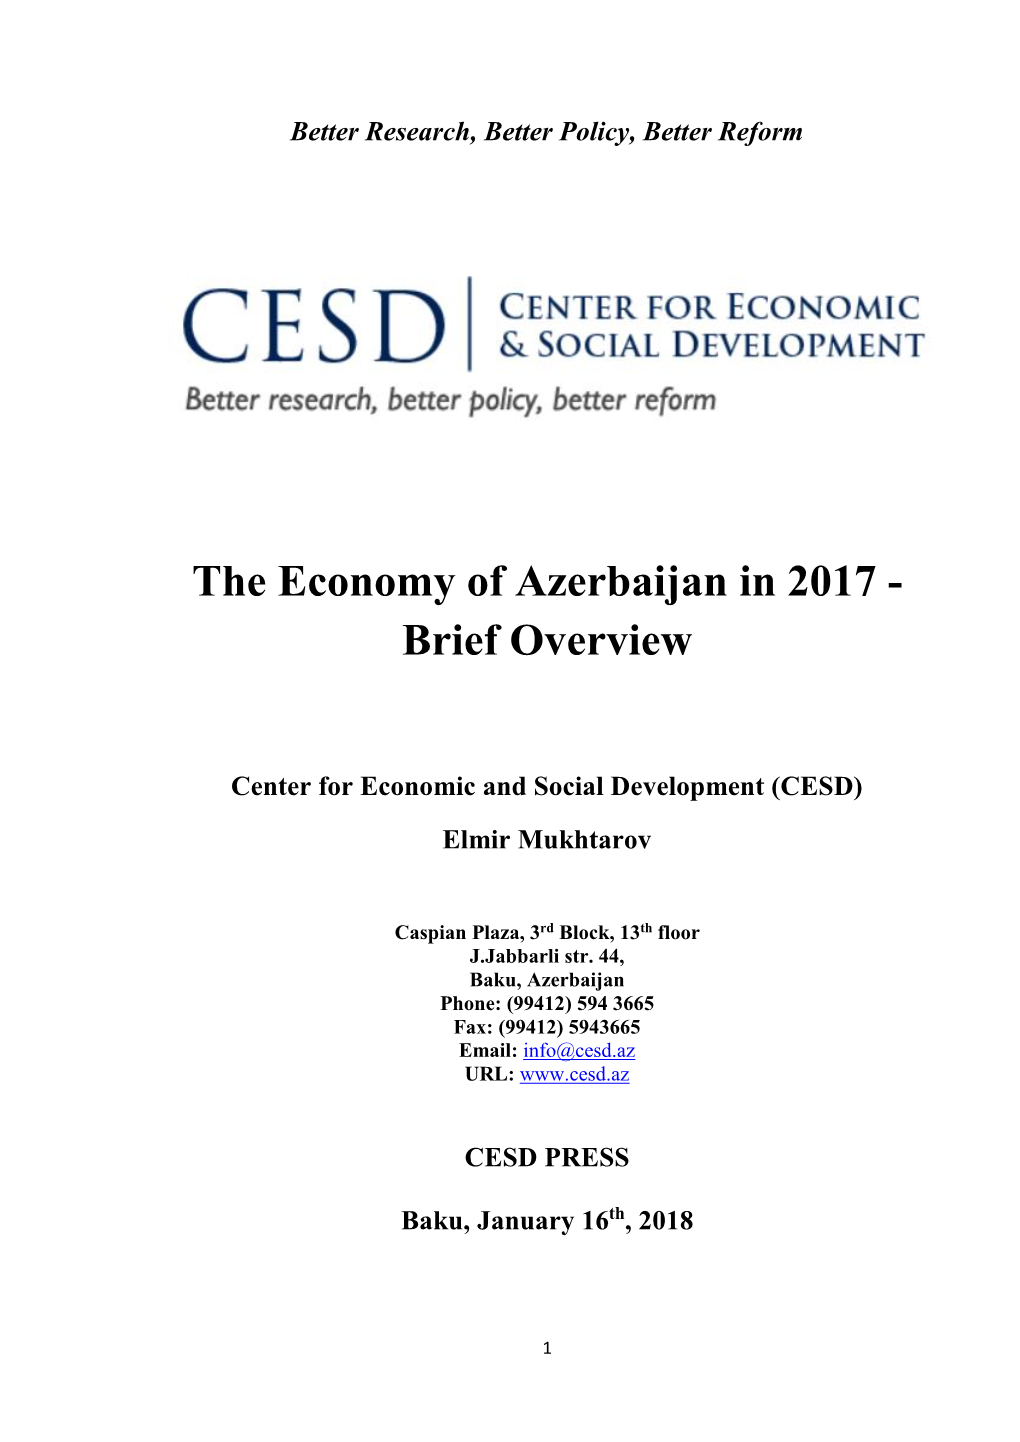 The Economy of Azerbaijan in 2017 - Brief Overview